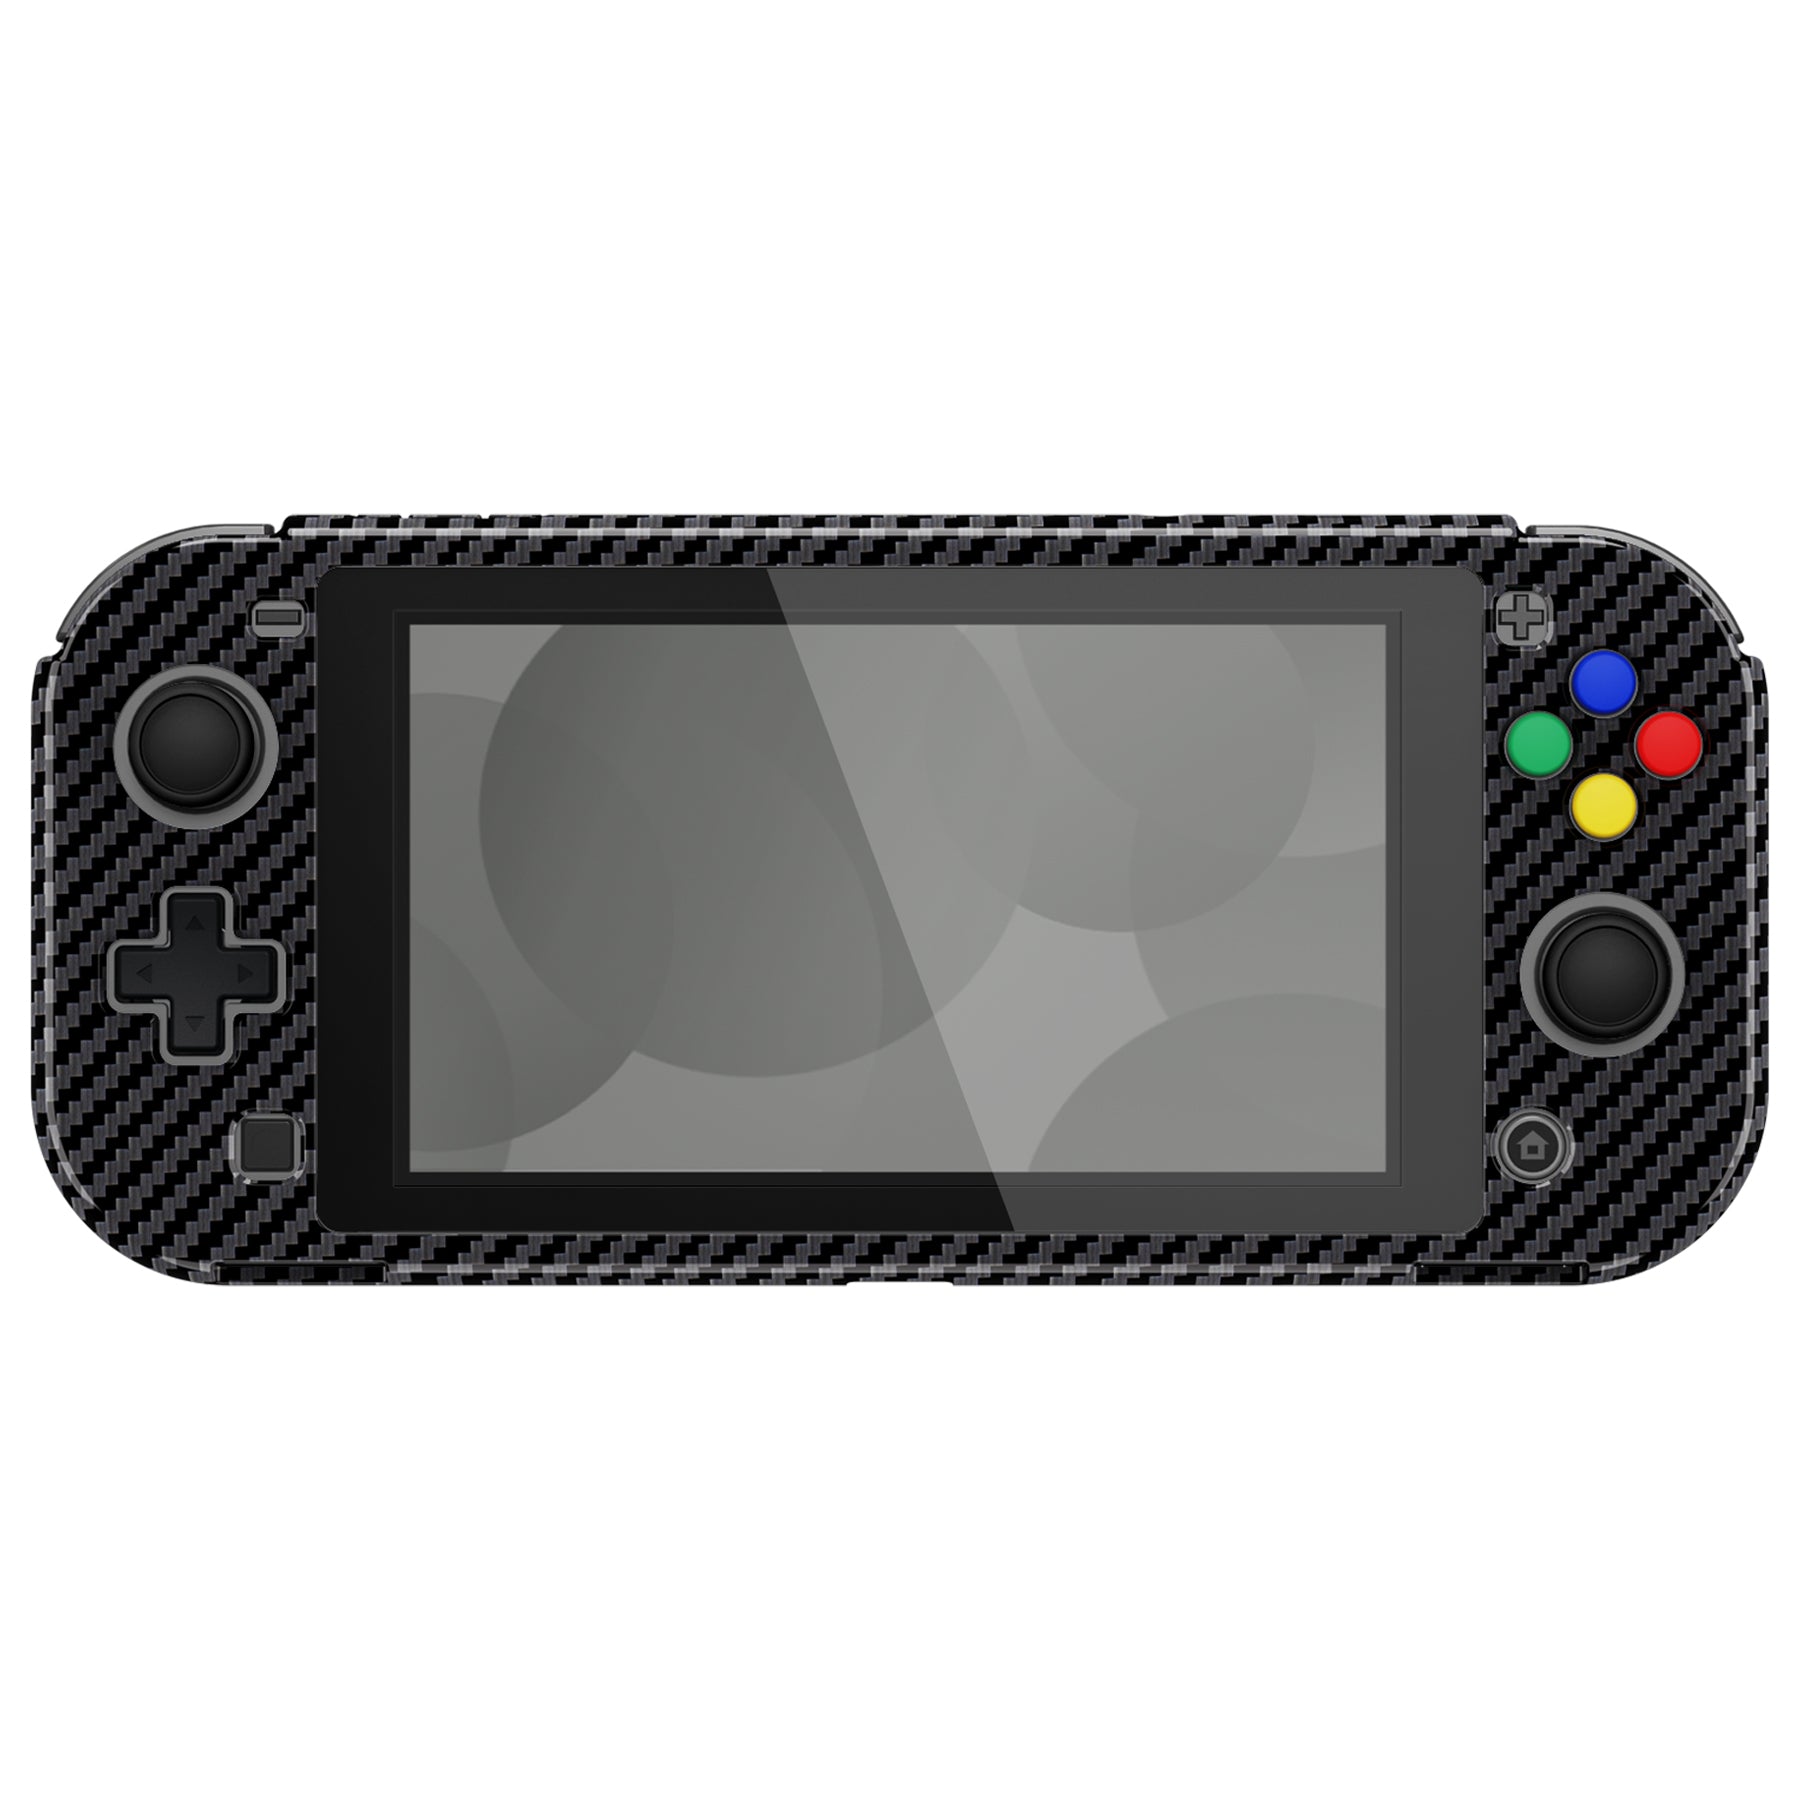 PlayVital Graphite Carbon Fiber Protective Grip Case for Nintendo Switch Lite, Hard Cover Protector for Nintendo Switch Lite - Screen Protector & Thumb Grips & Buttons Stickers Included - YYNLS001 PlayVital